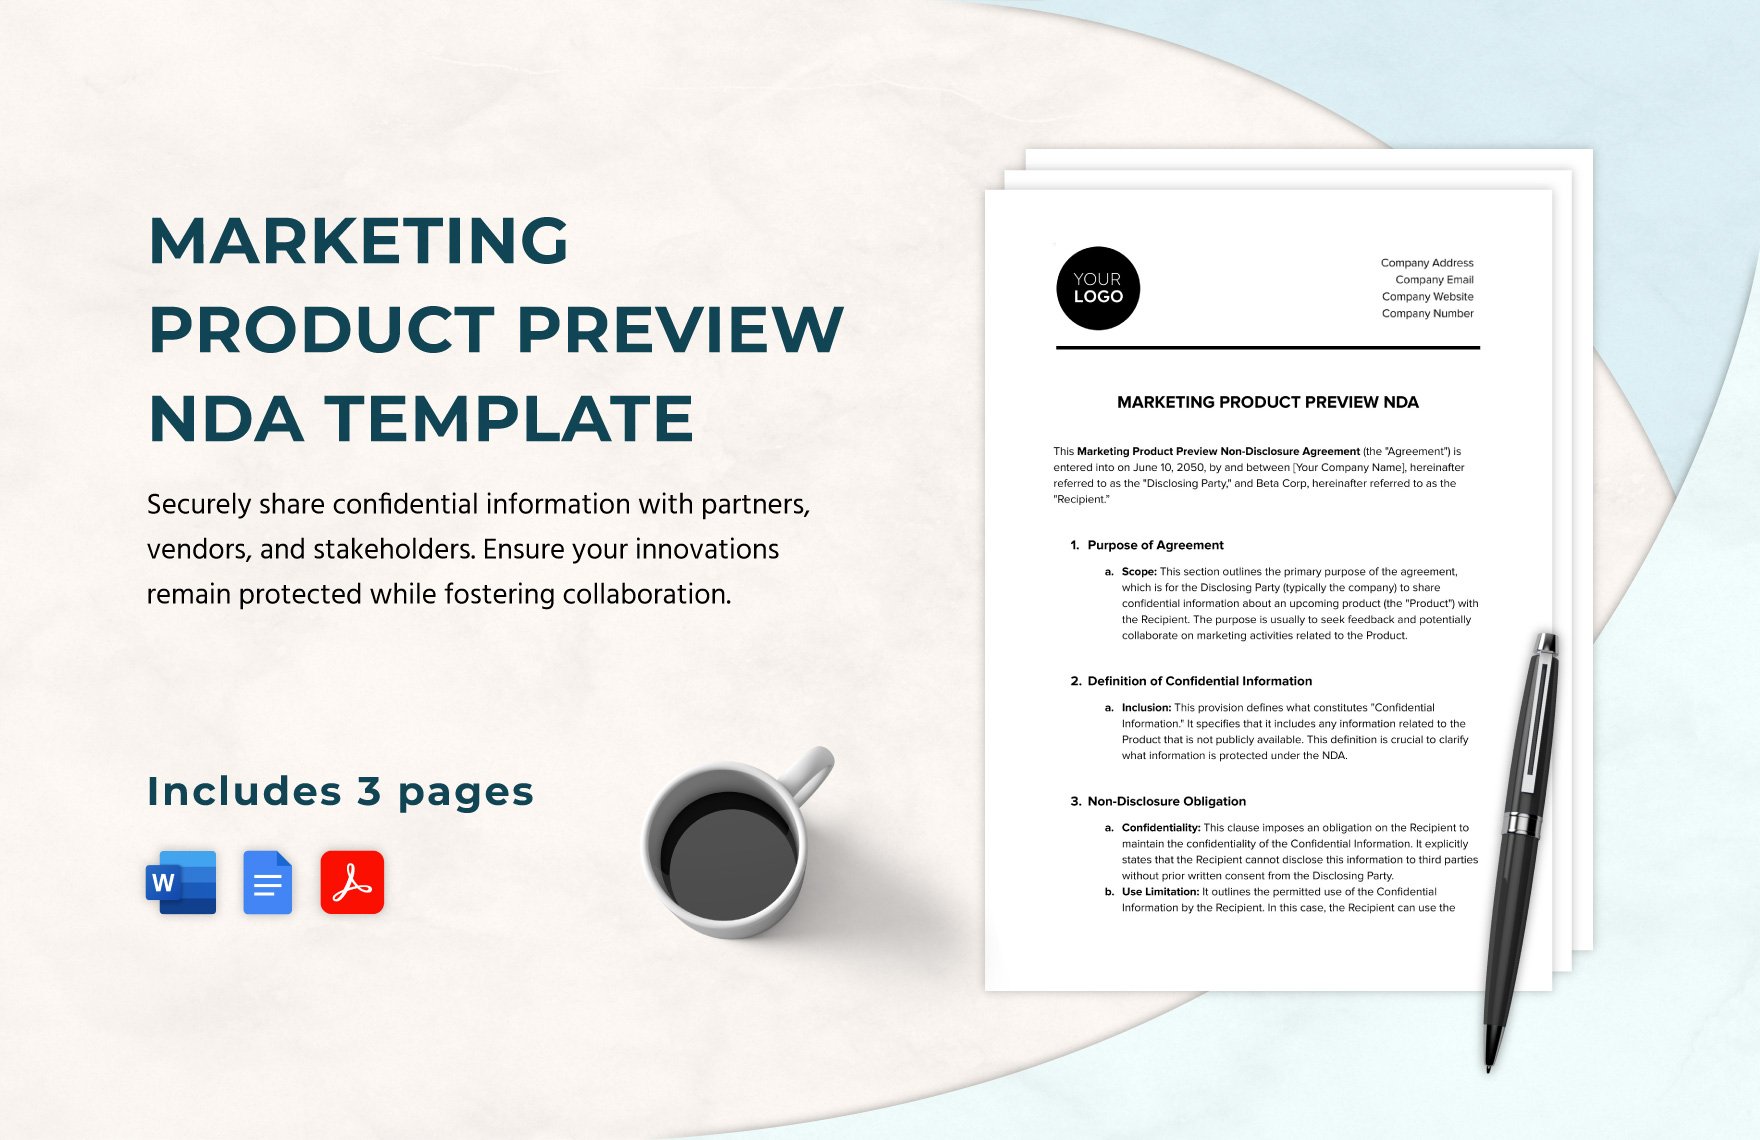 Marketing Product Preview NDA Template